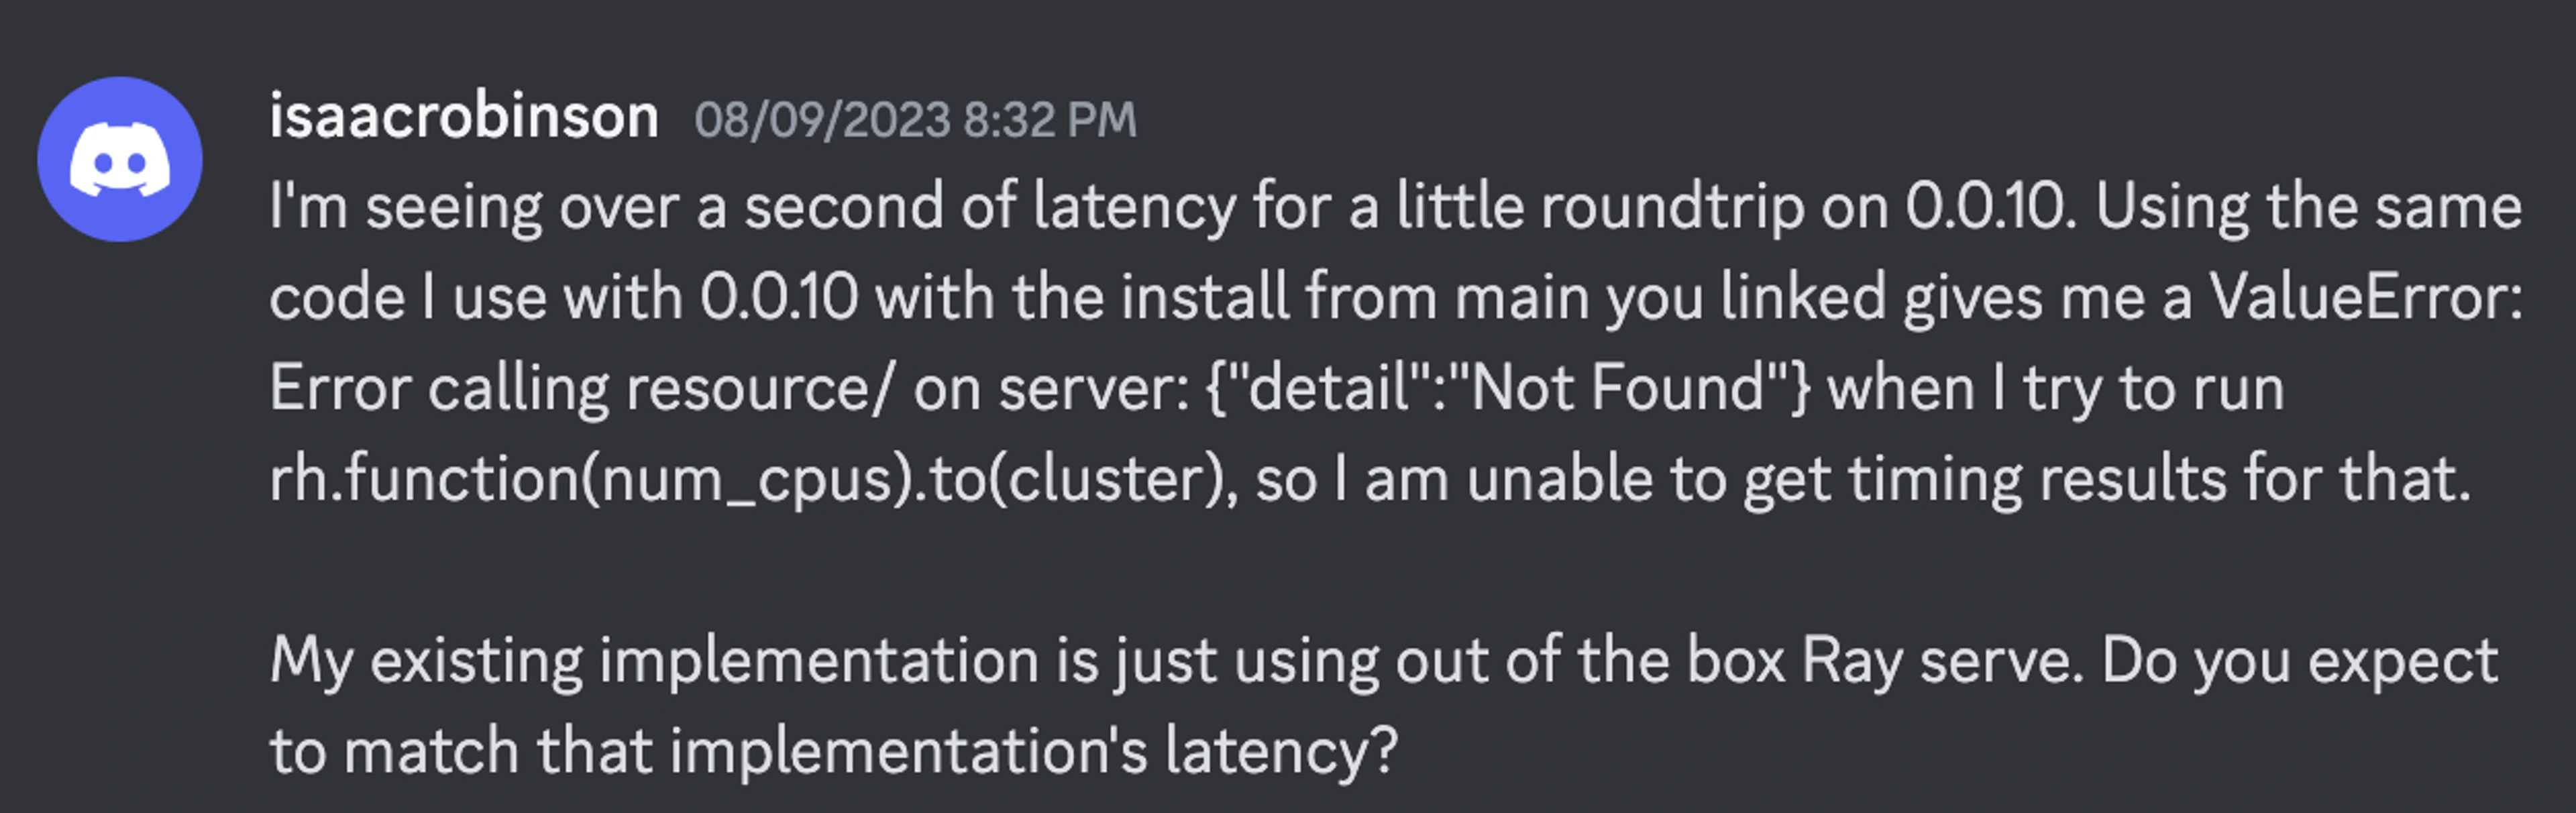 I'm seeing over a second of latency for a little roundtrip on 0.0.10. Using the same code I use with 0.0.10 with the install from main you linked gives me a ValueError: Error calling resource/ on server: {"detail":"Not Found"} when I try to run rh.function(num_cpus).to(cluster), so I am unable to get timing results for that.  My existing implementation is just using out of the box Ray serve. Do you expect to match that implementation's latency?